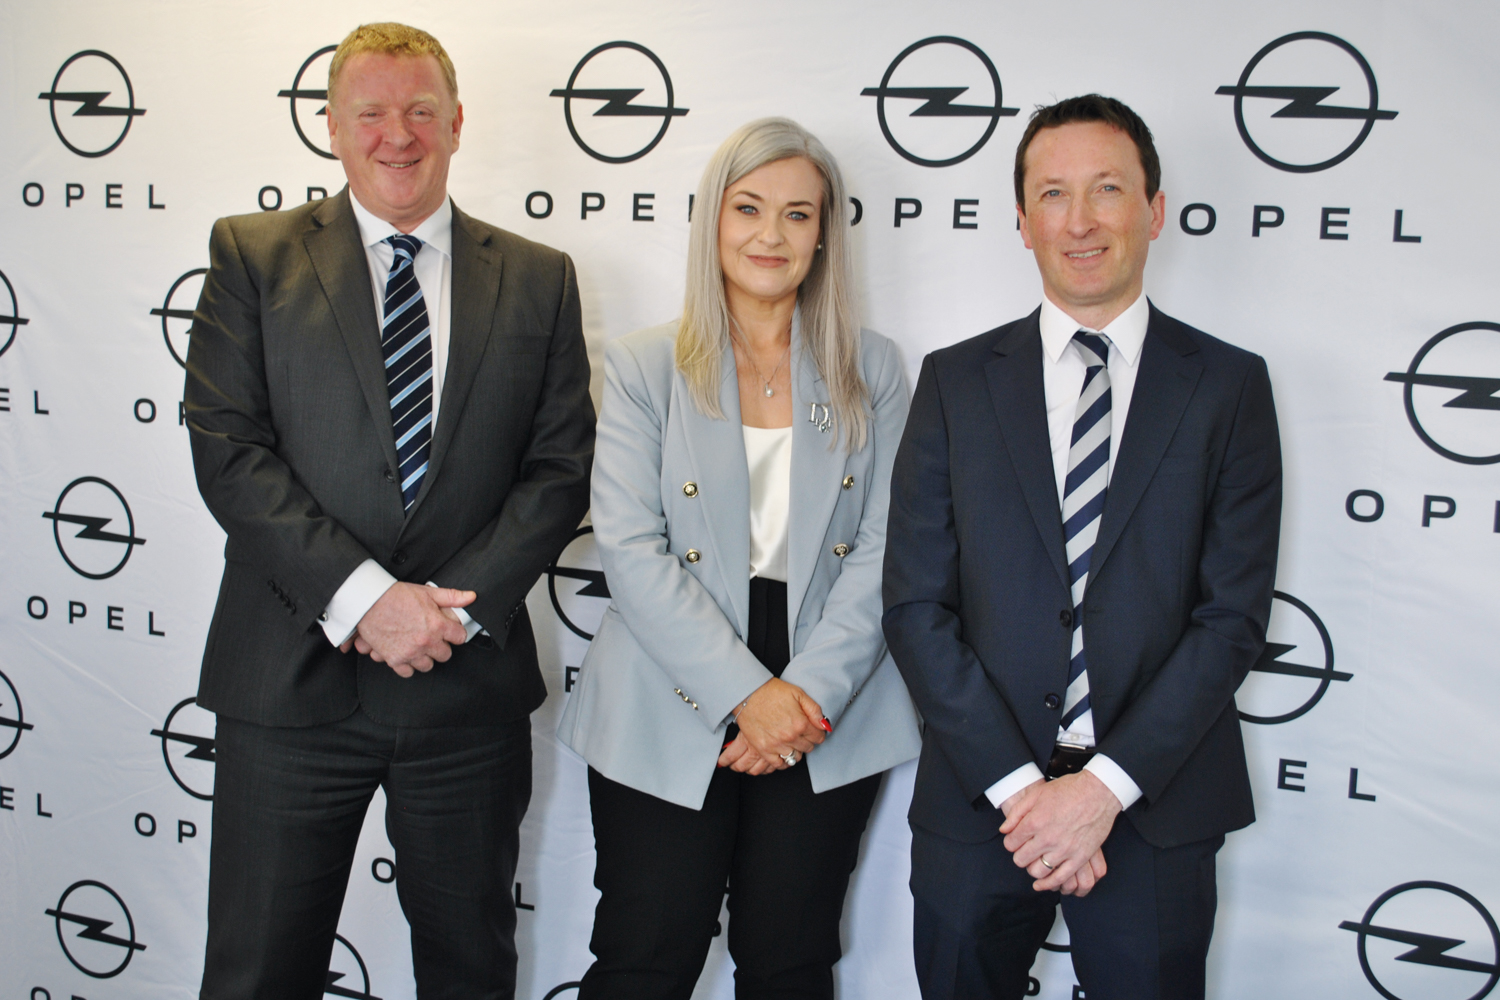 Rochford Motors gets Opel franchise for Mayo